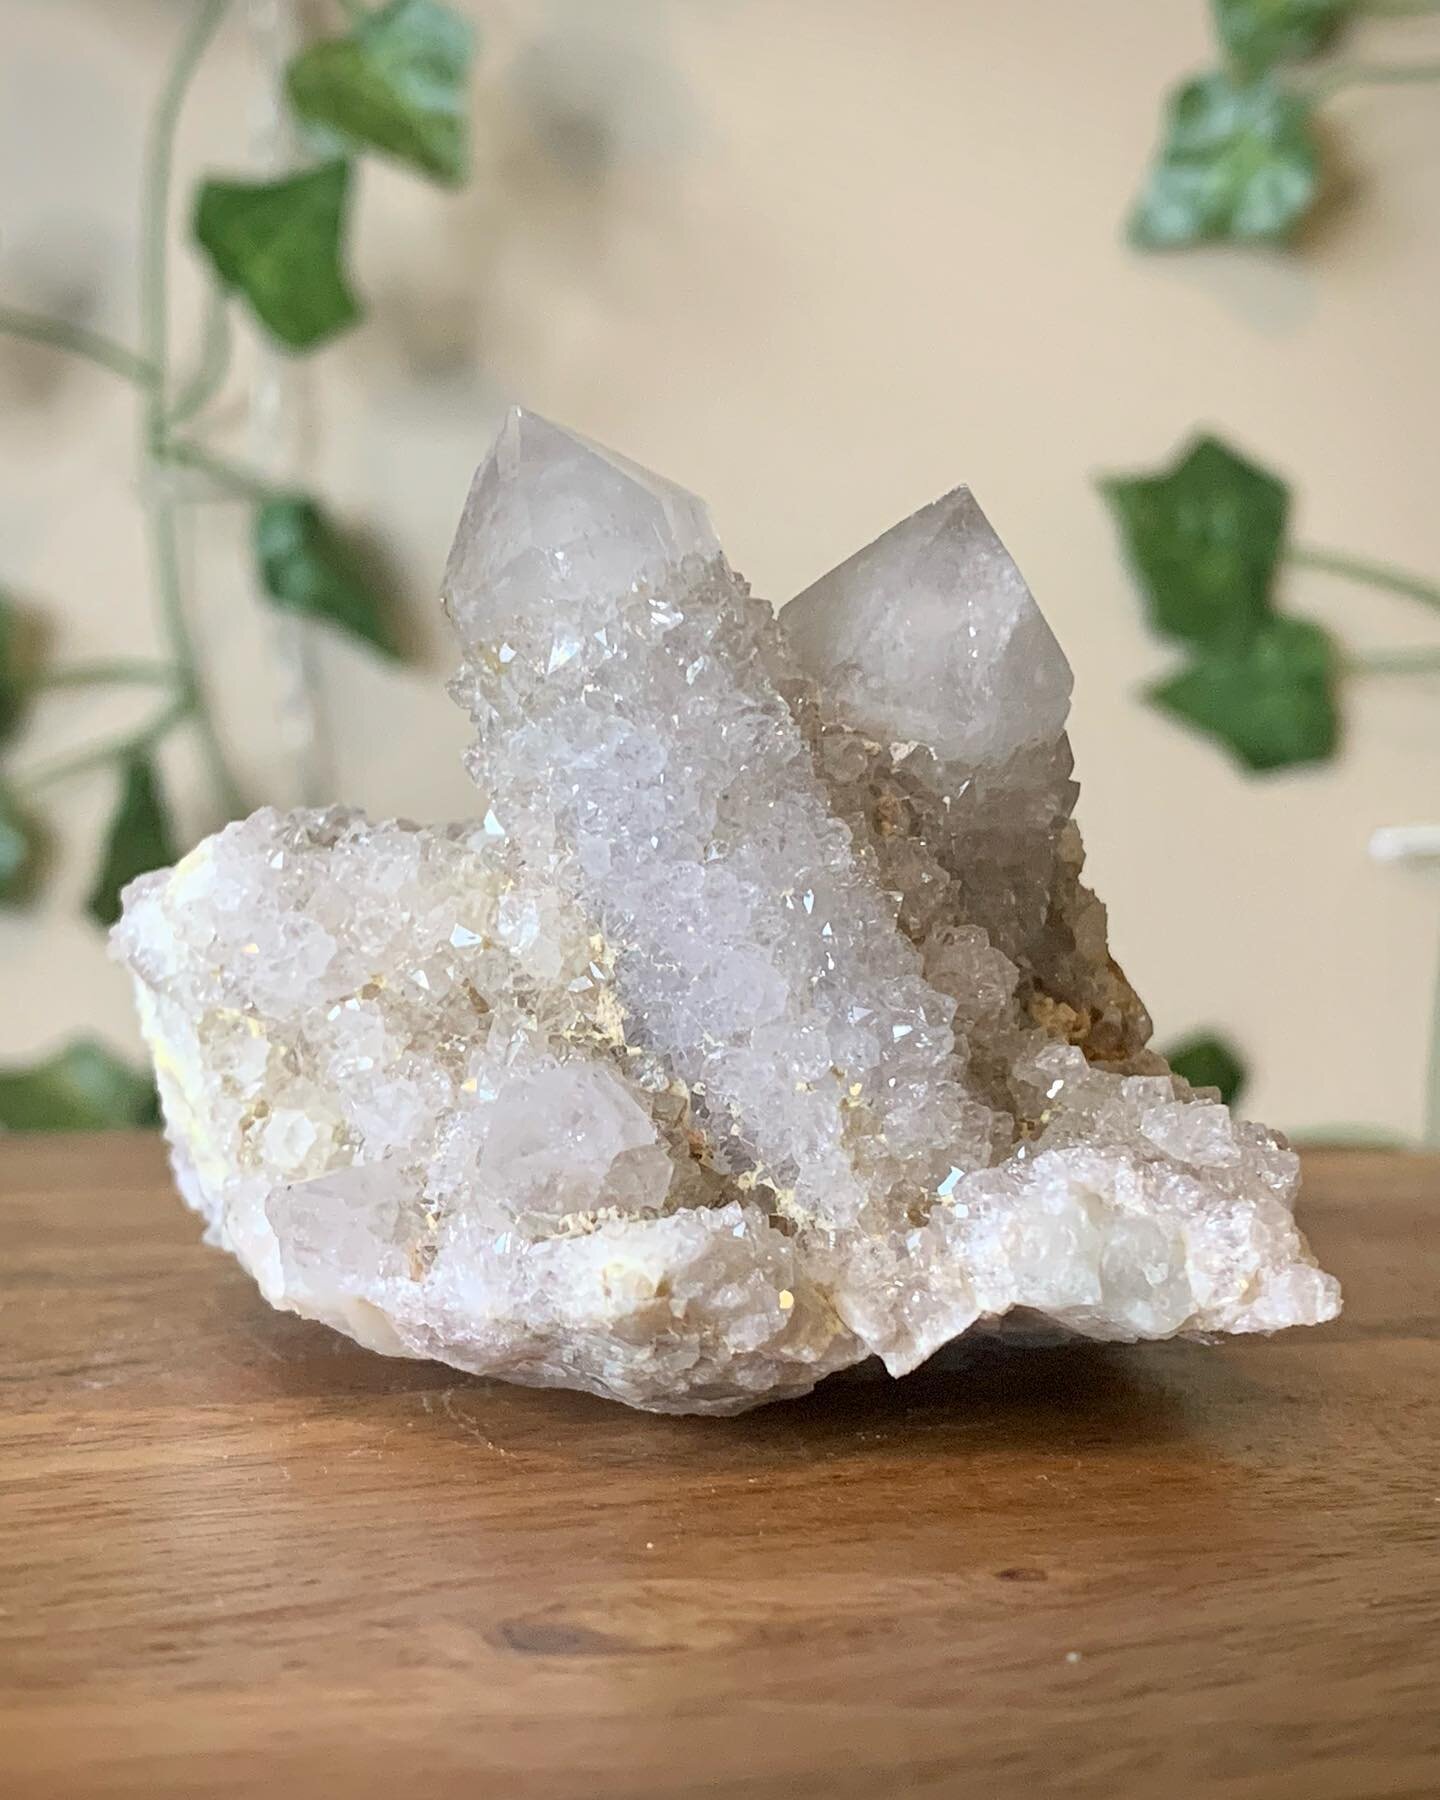 &bull;&bull;✨SPIRIT QUARTZ!✨&bull;&bull;

This beautiful sugary Lavender Spirit Quartz cluster is full of shine and lots of sparkle! The energy that comes from this piece is insane!! 

Spirit Quartz helps to ground the physical body and bring many di